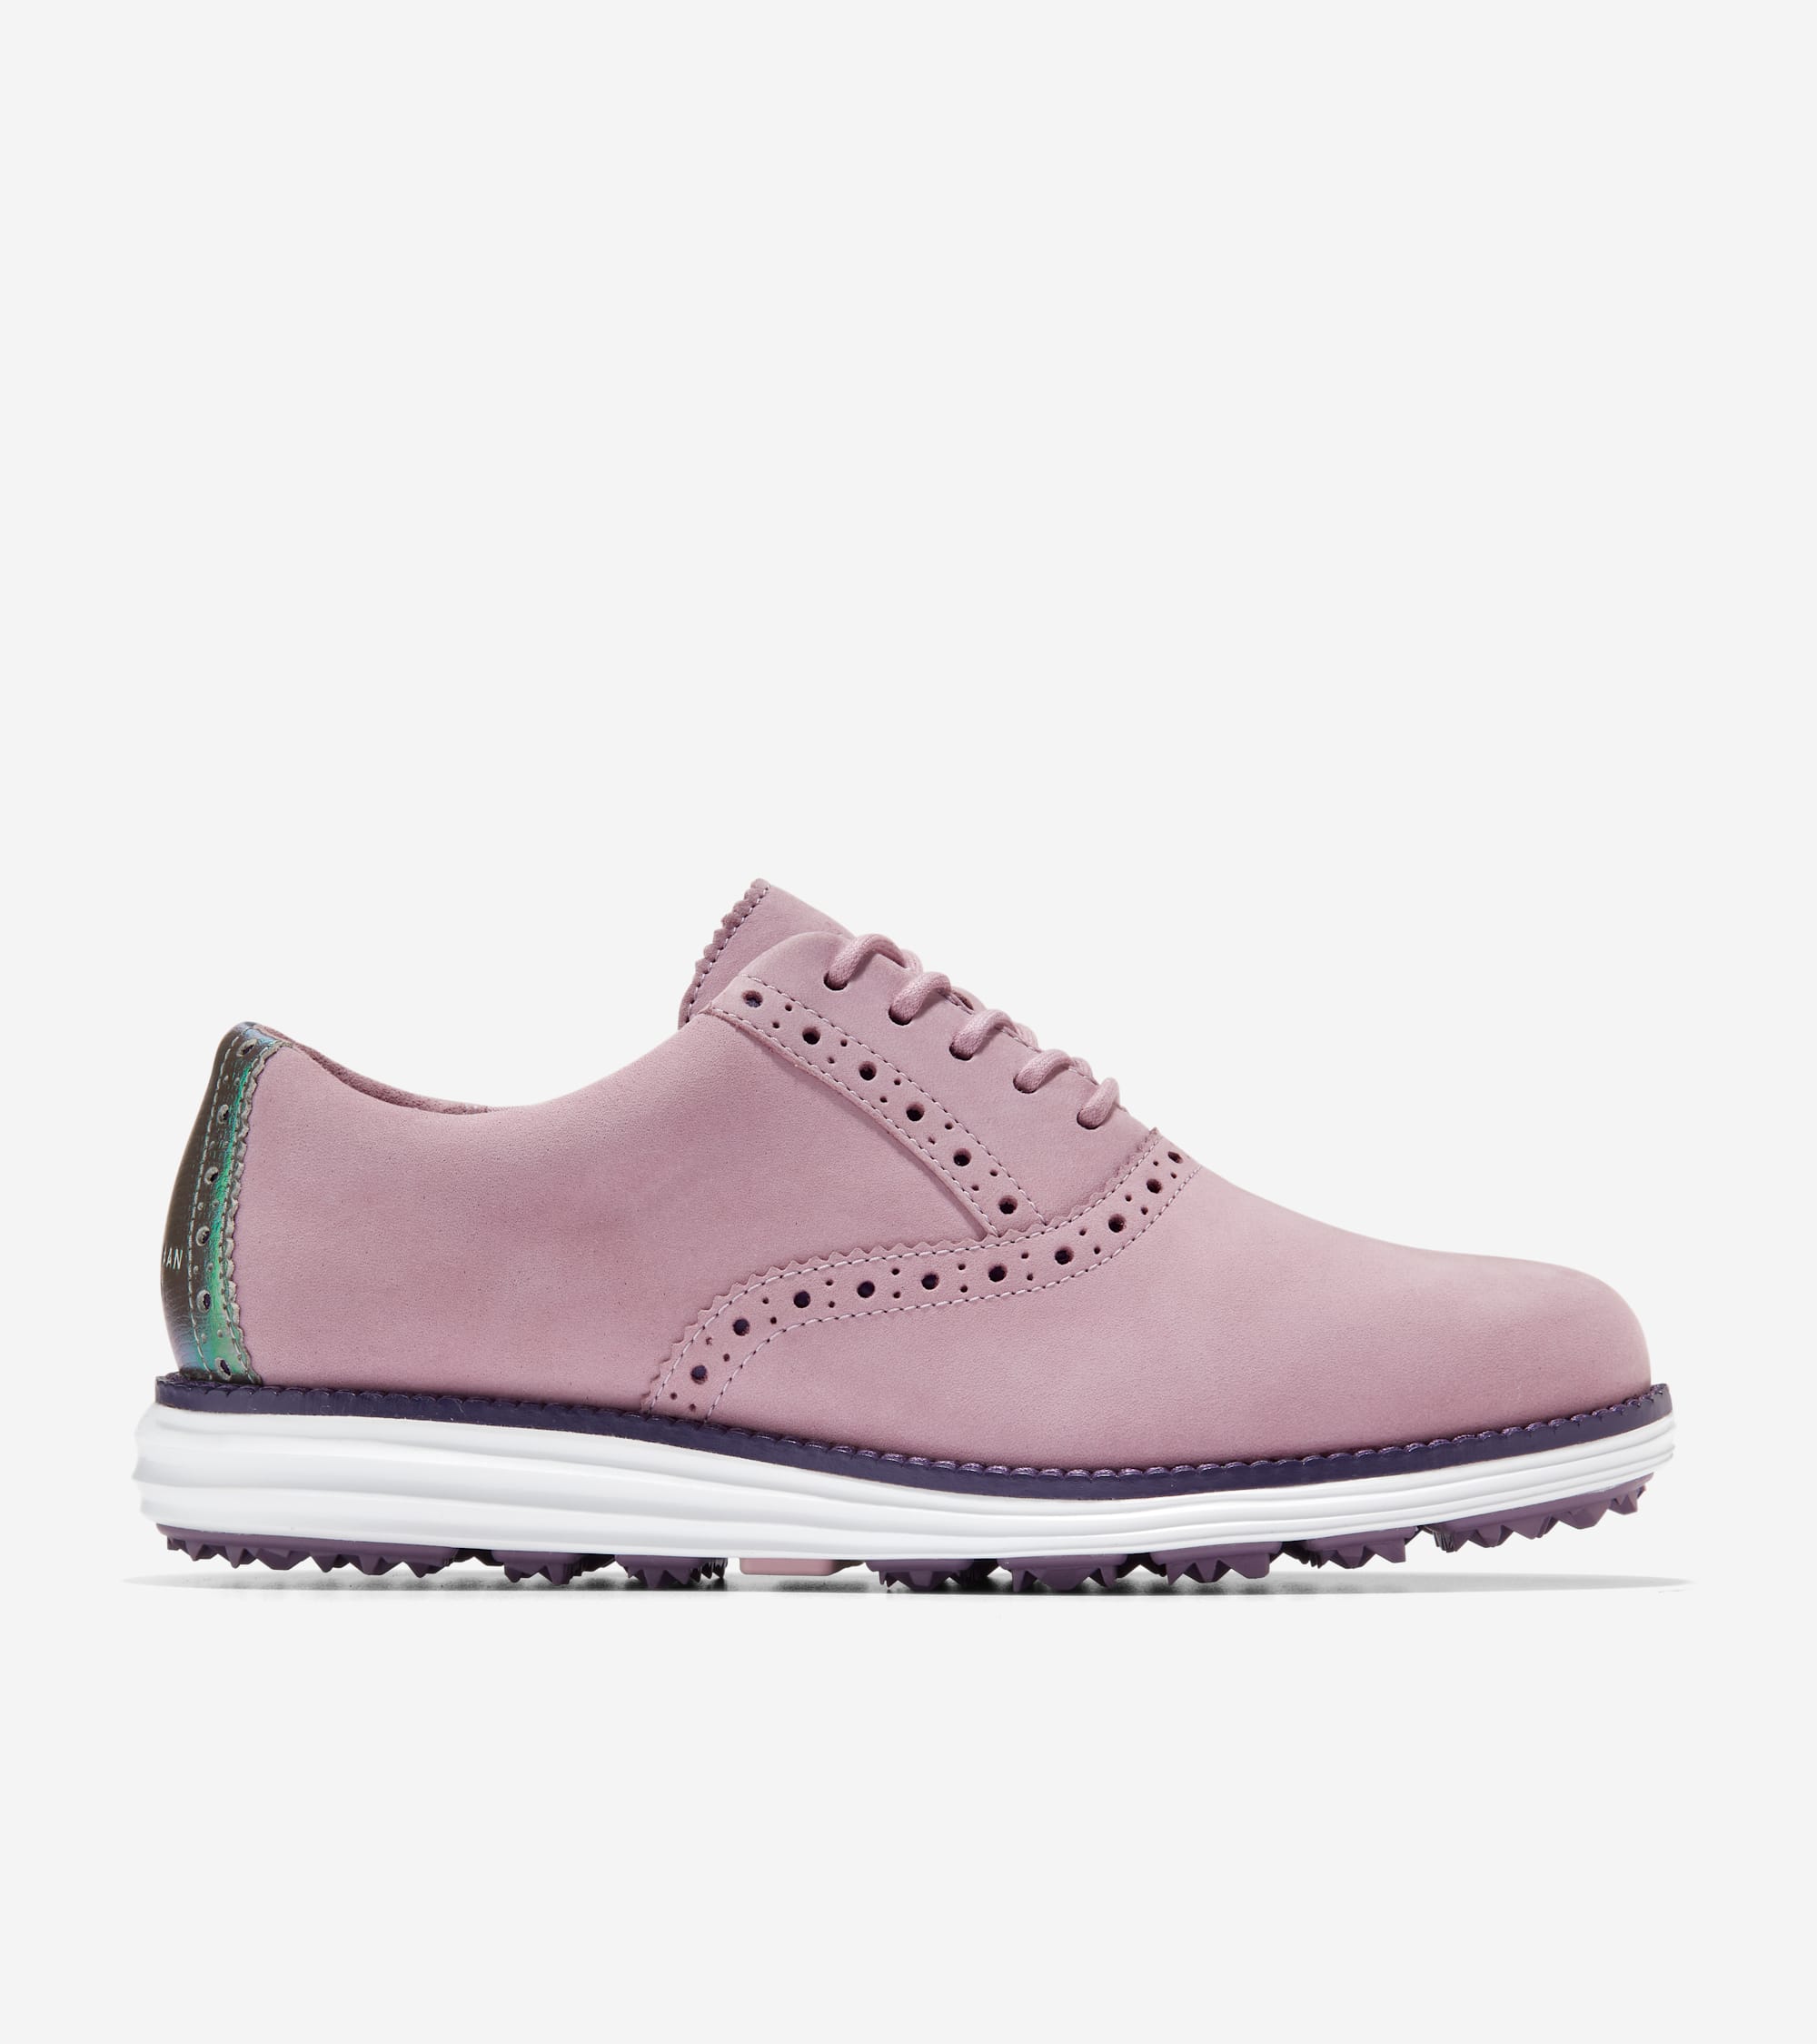 Image of riginalGrand Shortwing Golf Shoes